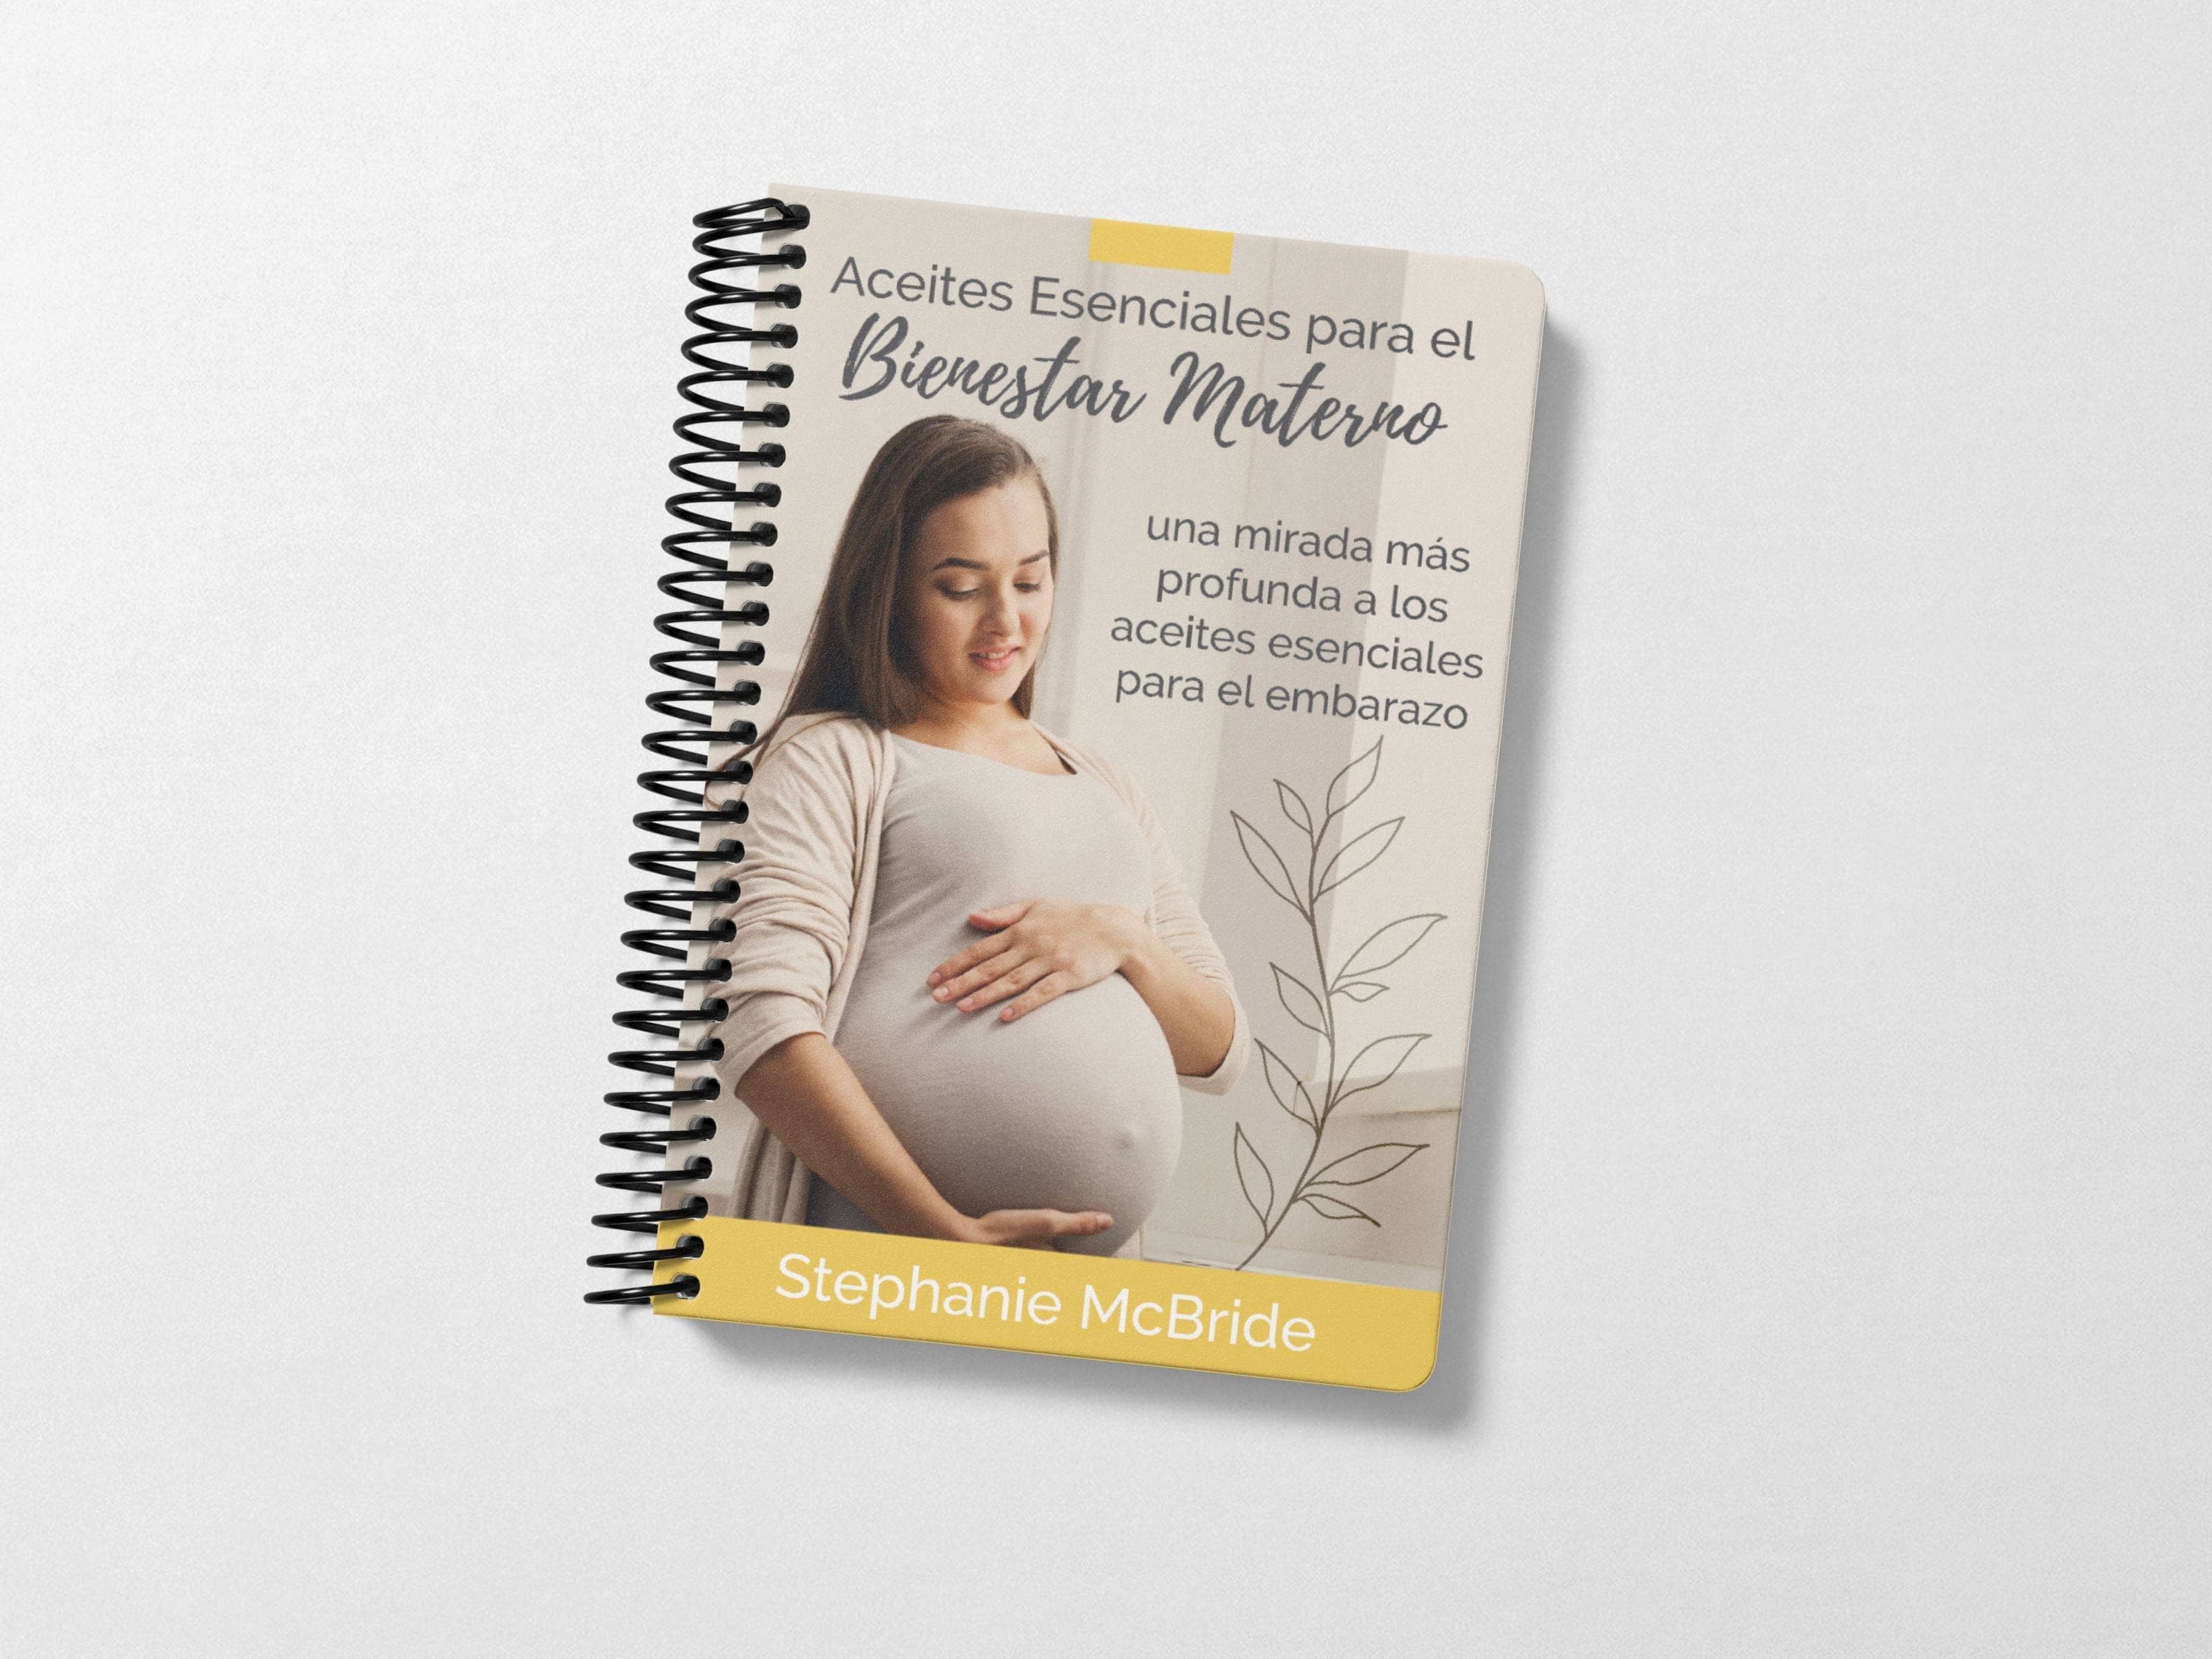 Spanish Essential Oils for Maternal Wellness (Digital Version) Books Your Oil Tools 